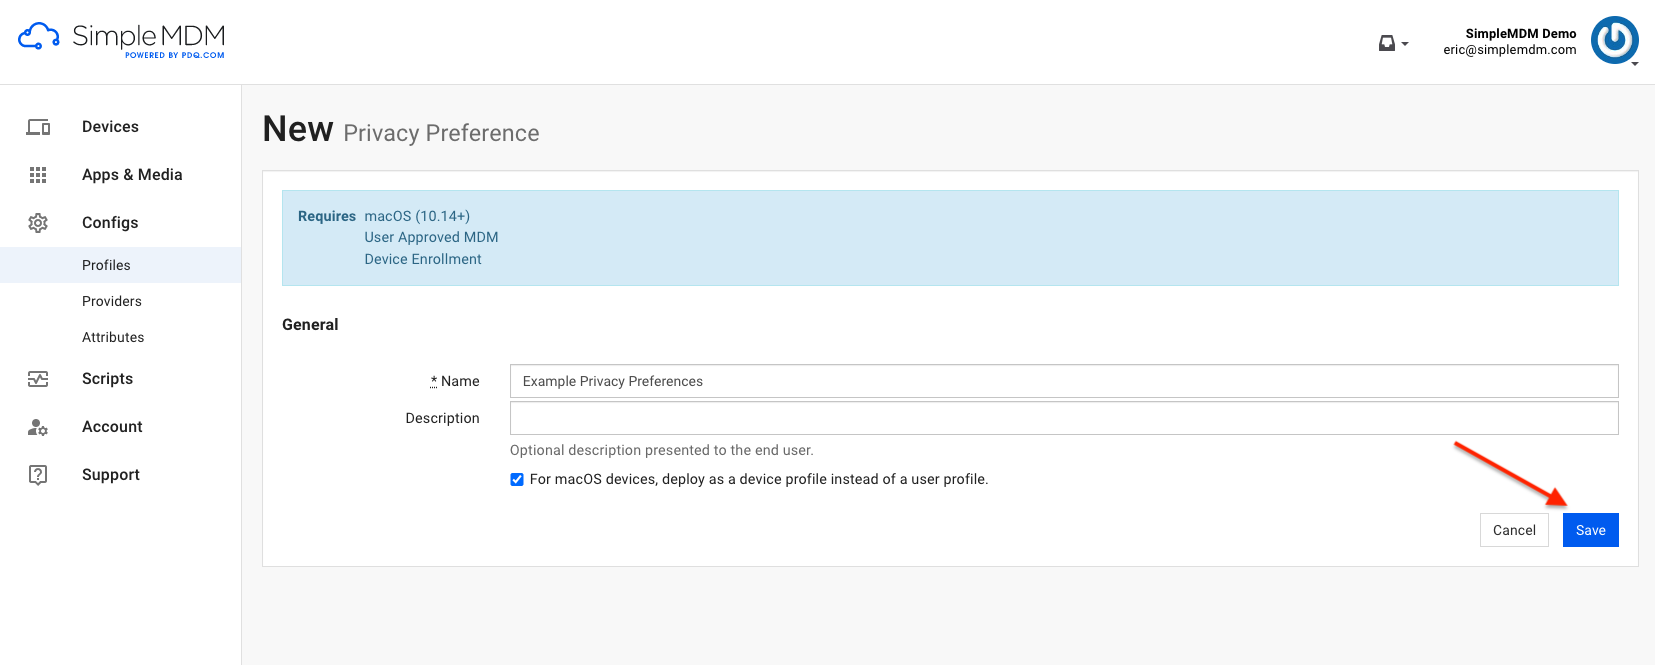 Image of the "Save" button in the New Privacy Preference panel of the SimpleMDM Profiles section